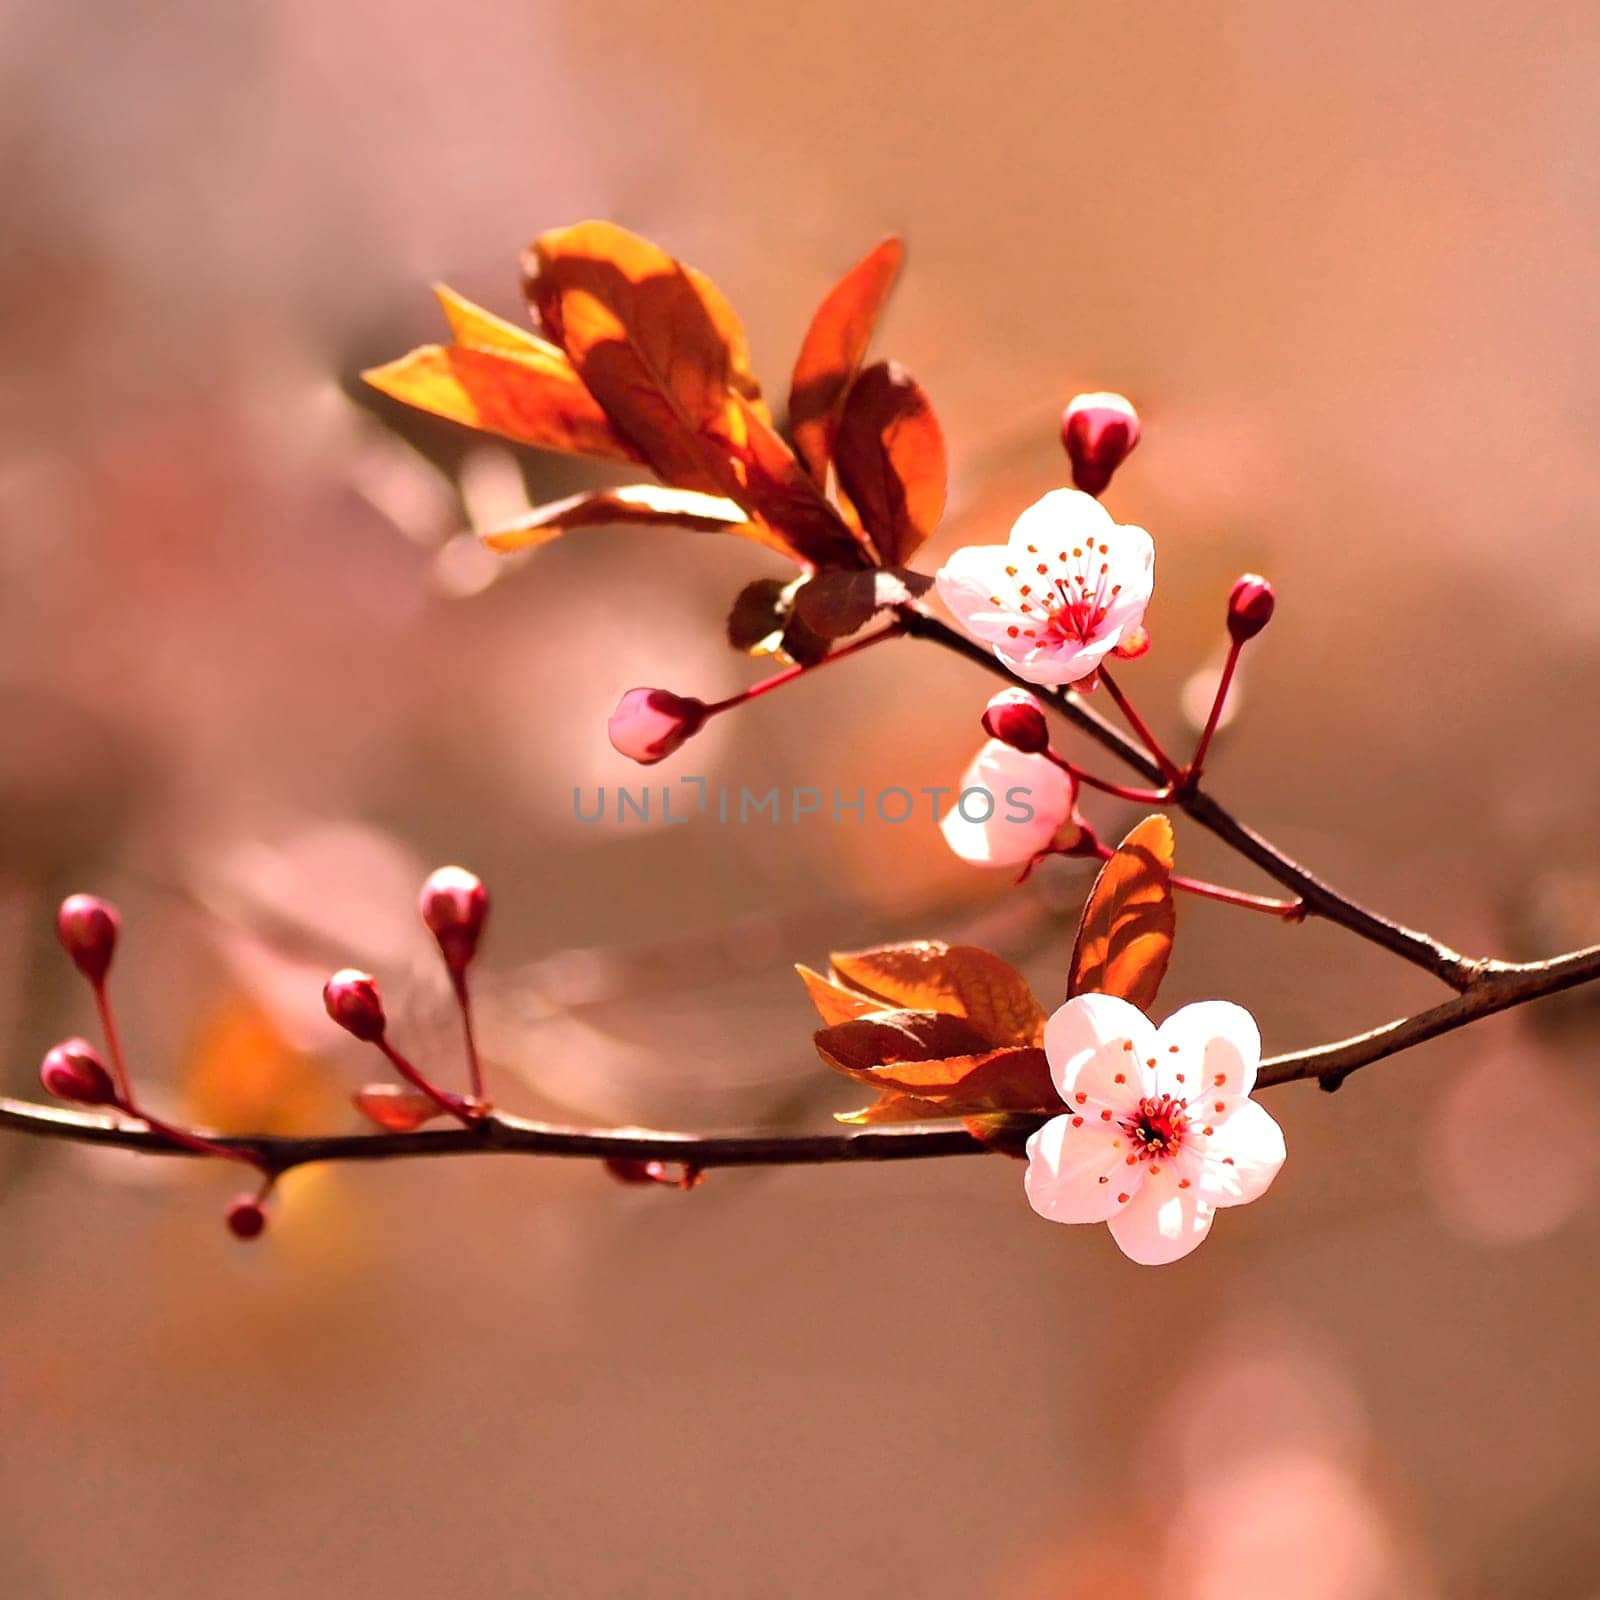 Springtime - Beautiful flowering Japanese cherry - Sakura. Background with flowers on a spring day. by Montypeter